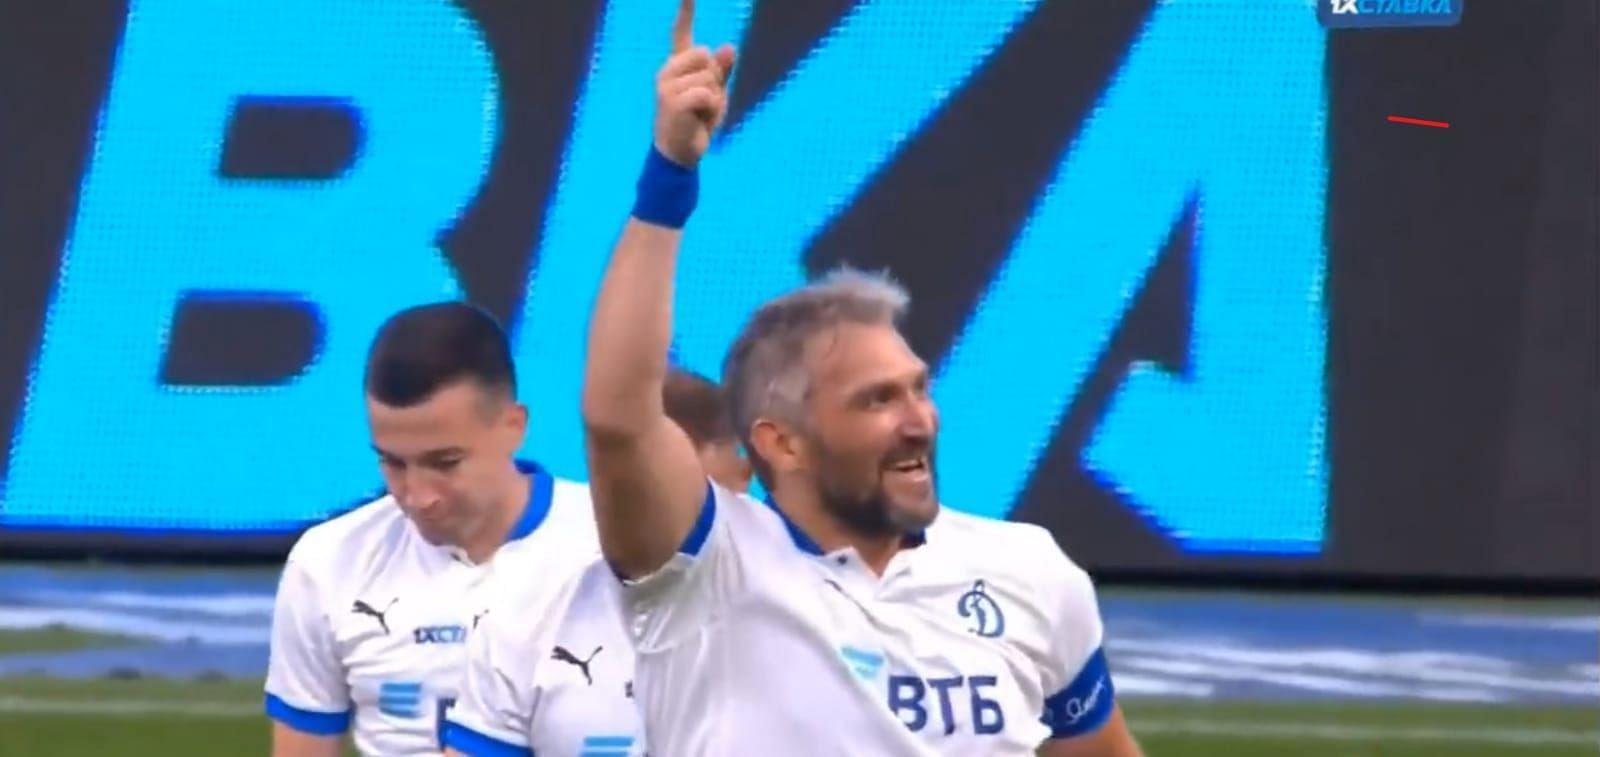 When Alexander Ovechkin scored the opening goal for Dynamo Moscow against FC Amkal